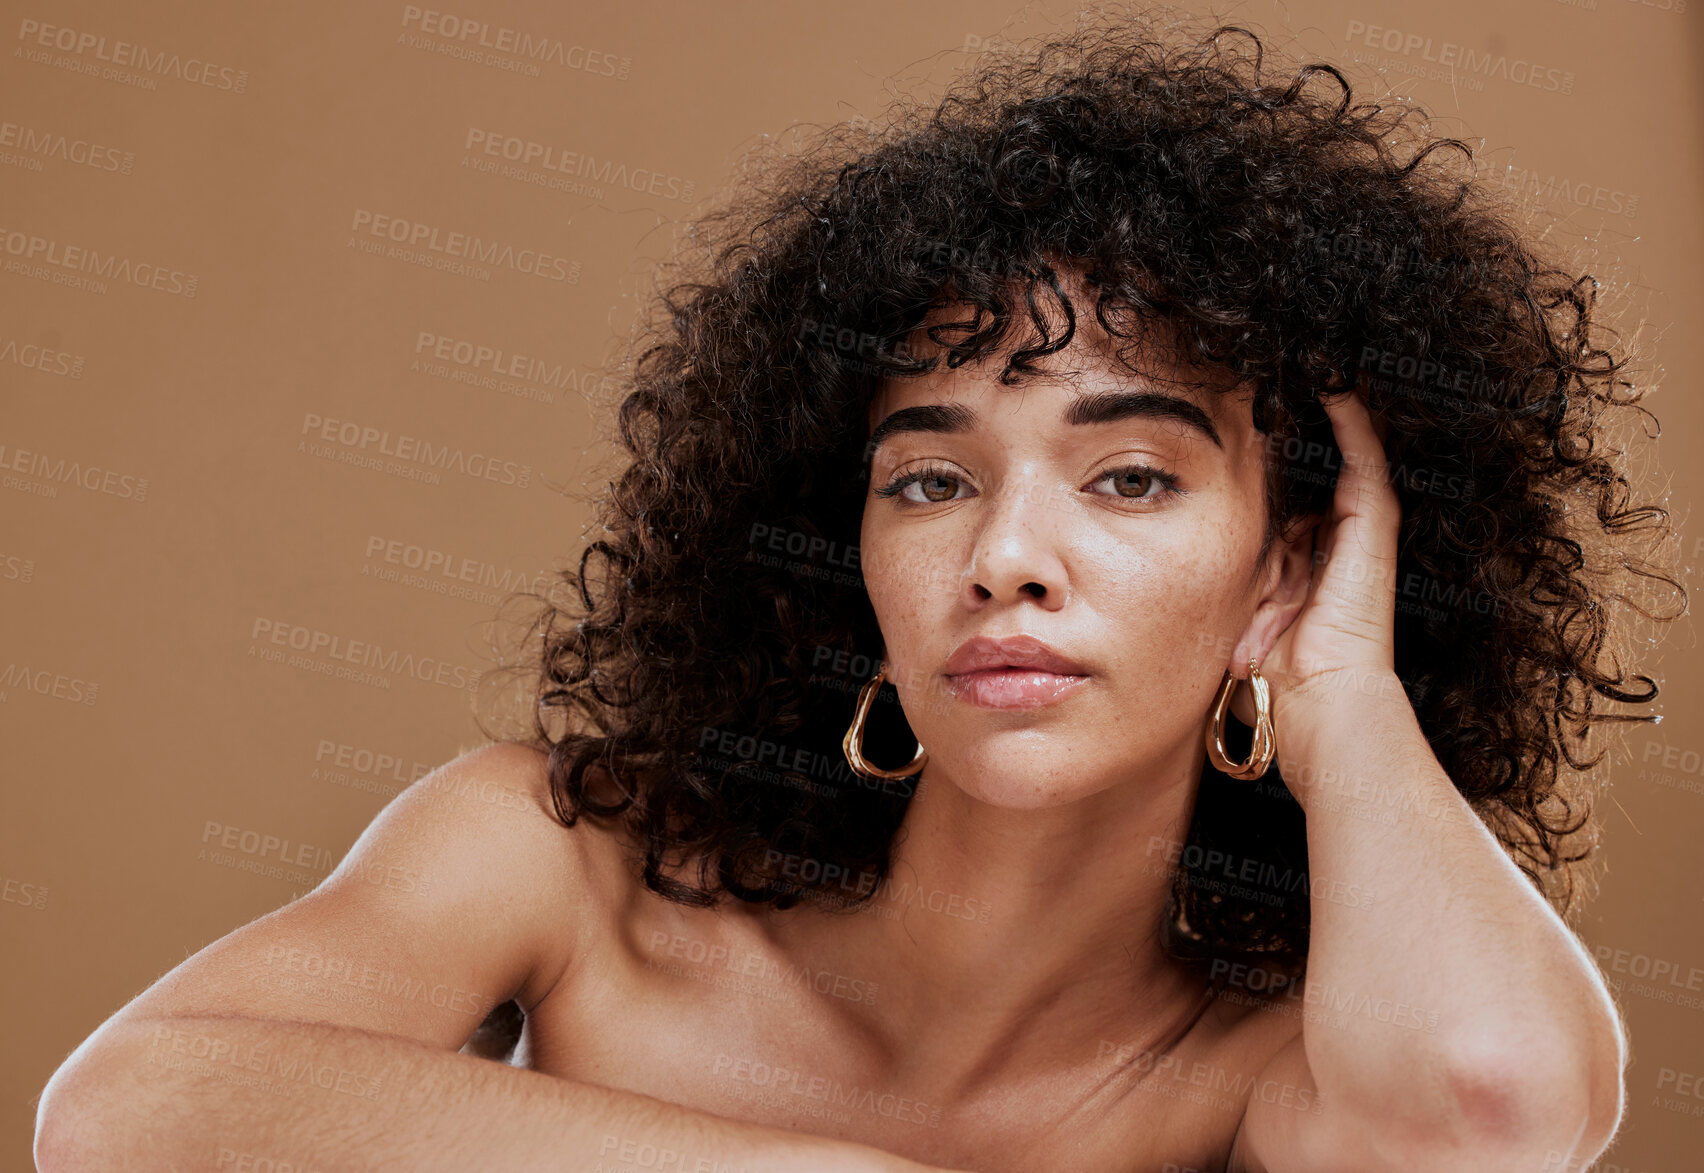 Buy stock photo Beauty, natural hair and skincare with woman, hair care and wellness cosmetics portrait against brown studio background. Healthy skin, makeup and glow with clean cosmetic mockup and curly hair.